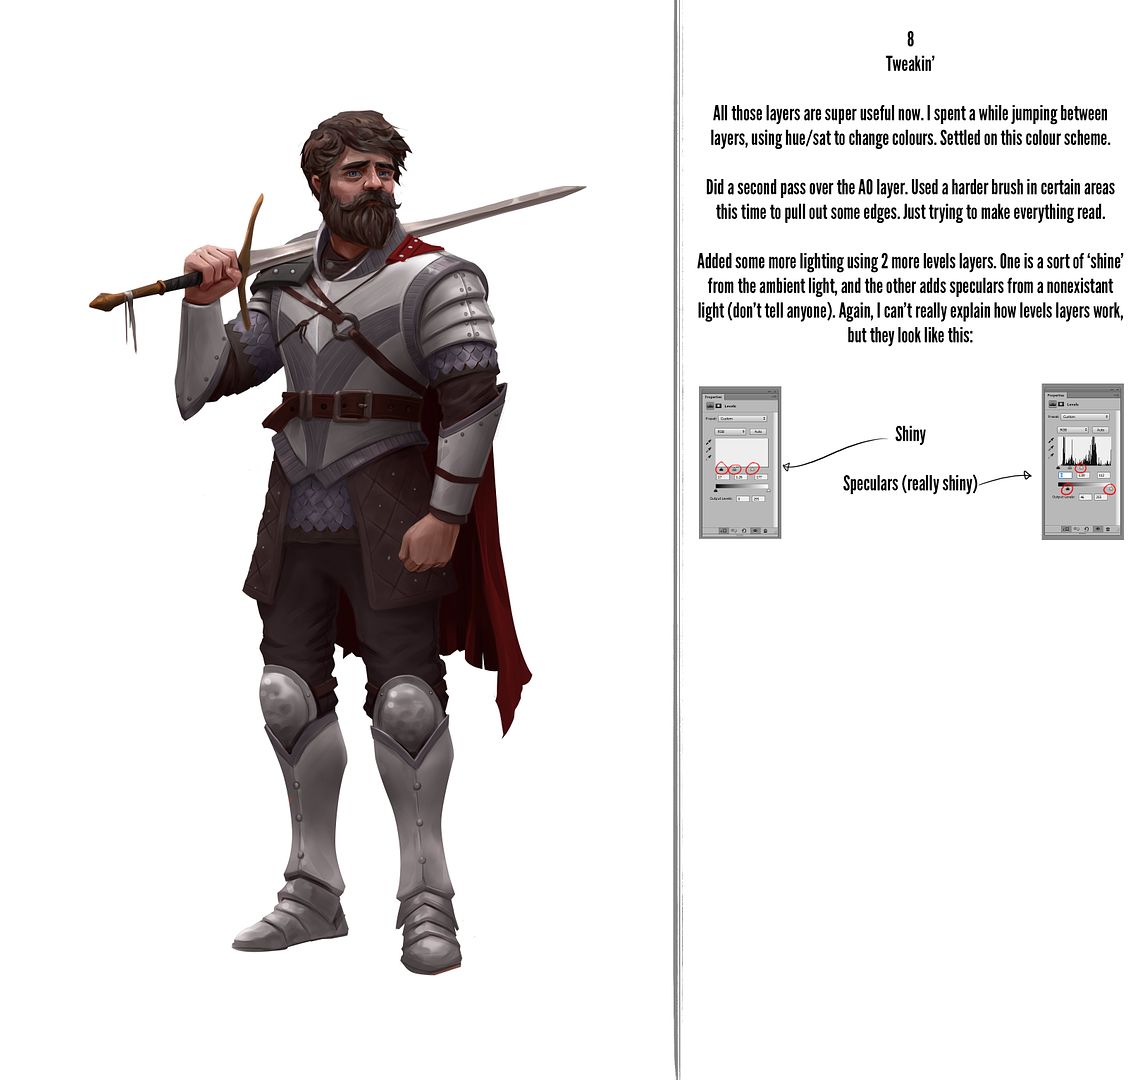 [Image: Knight_StepByStep_With_Notes_8.jpg]